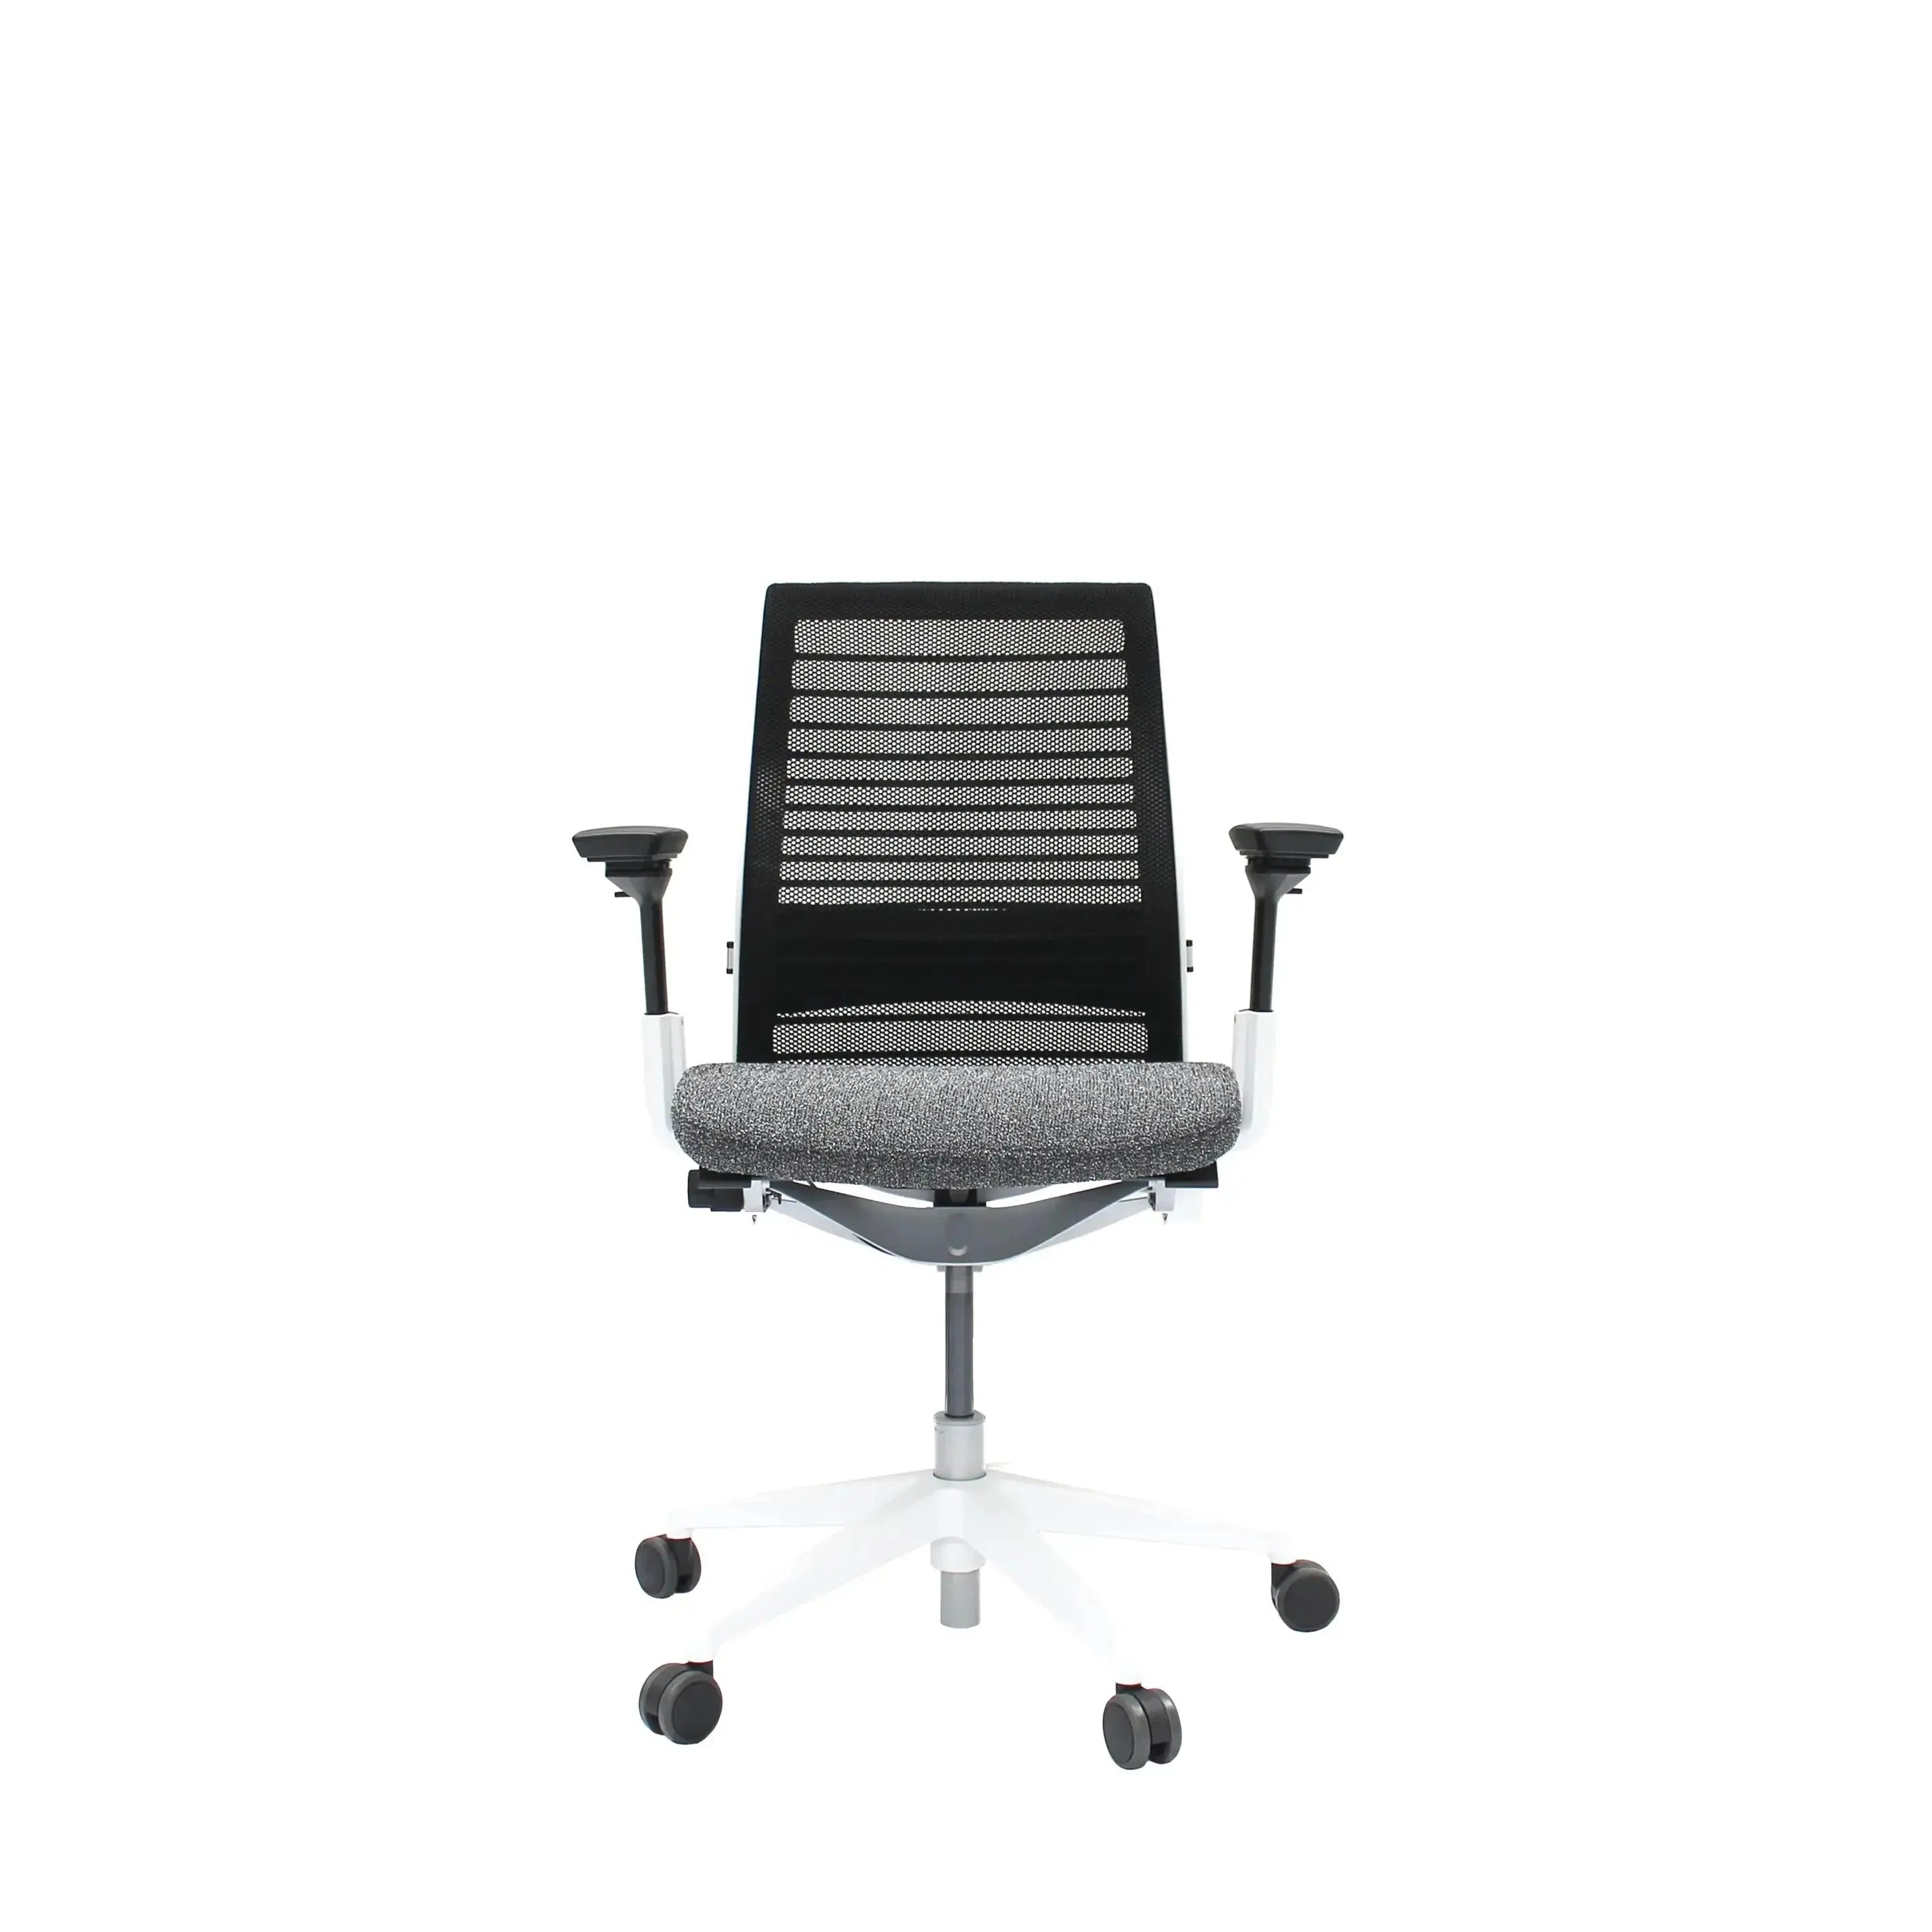 Steelcase Think Seagull / Black Jack Licorice Office Chairs